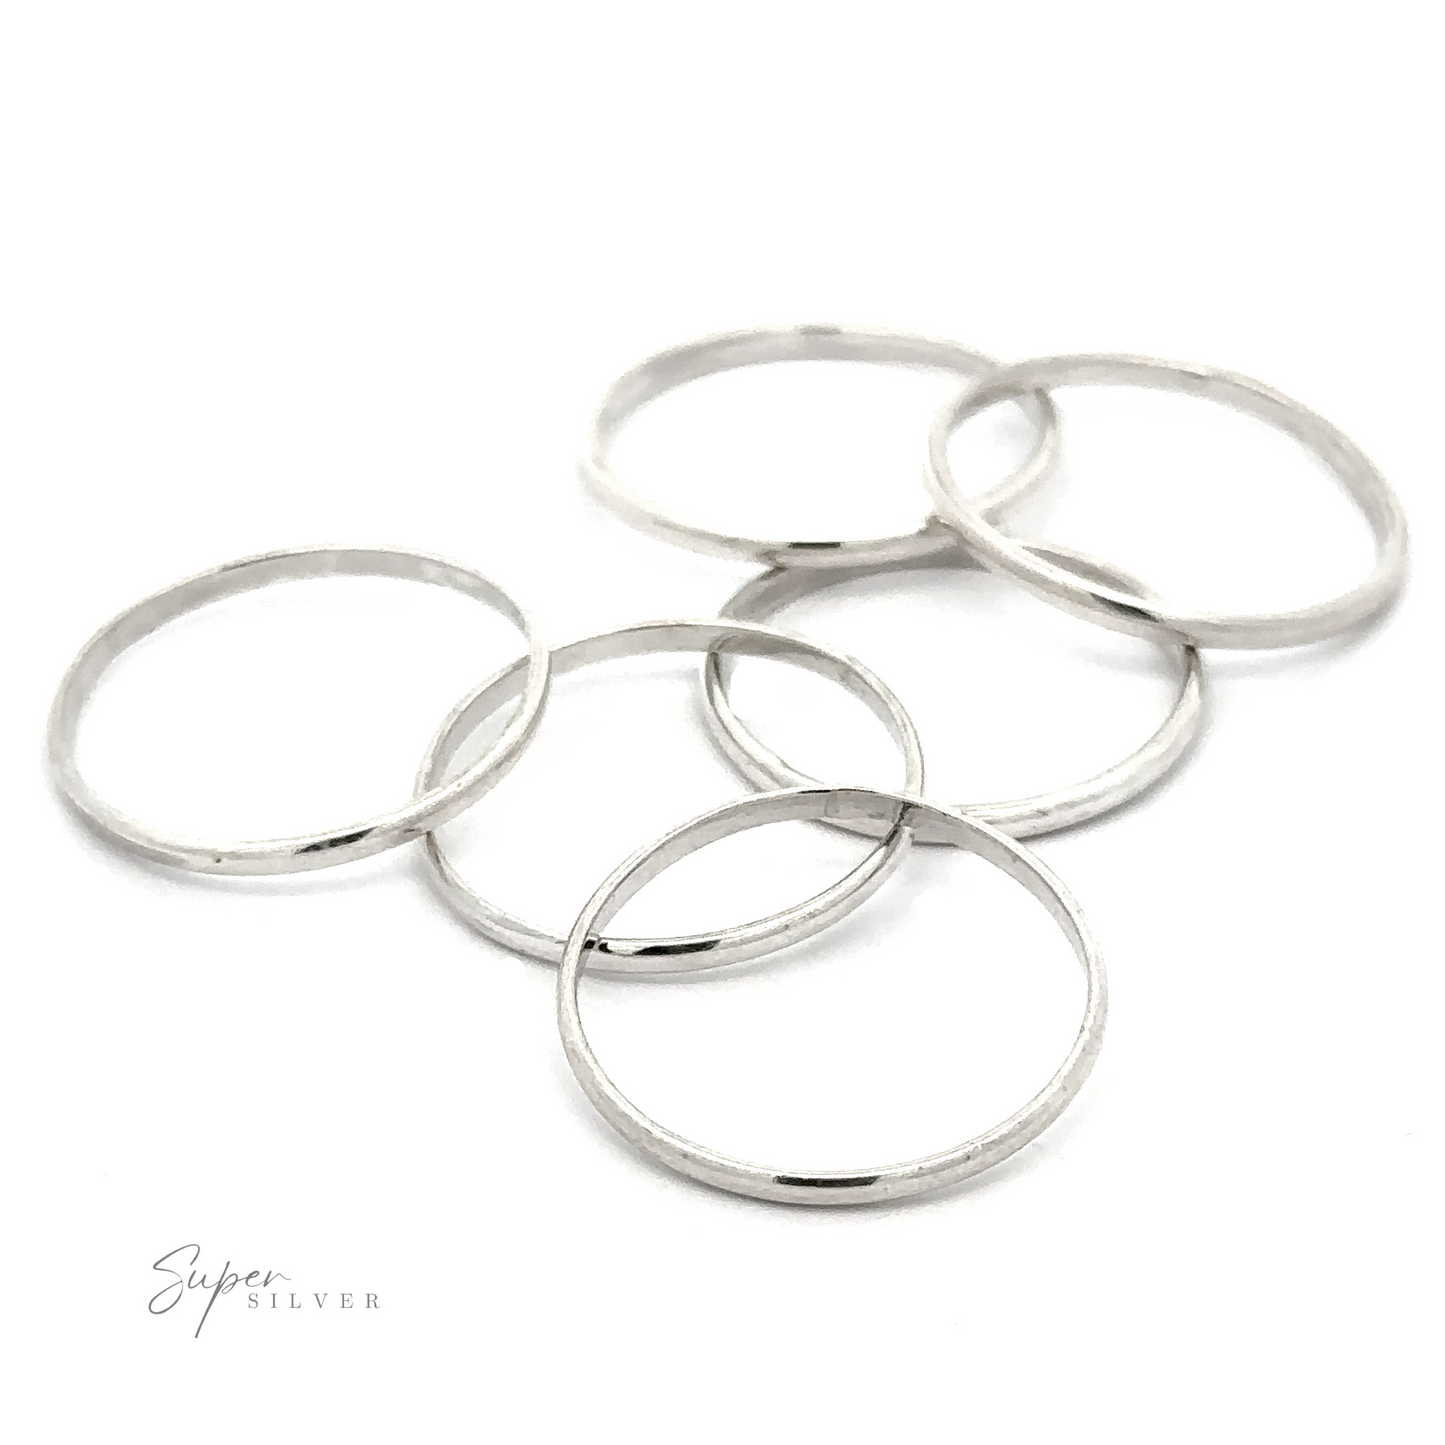 A minimalist stack of 1.5mm Plain Bands on a white background.